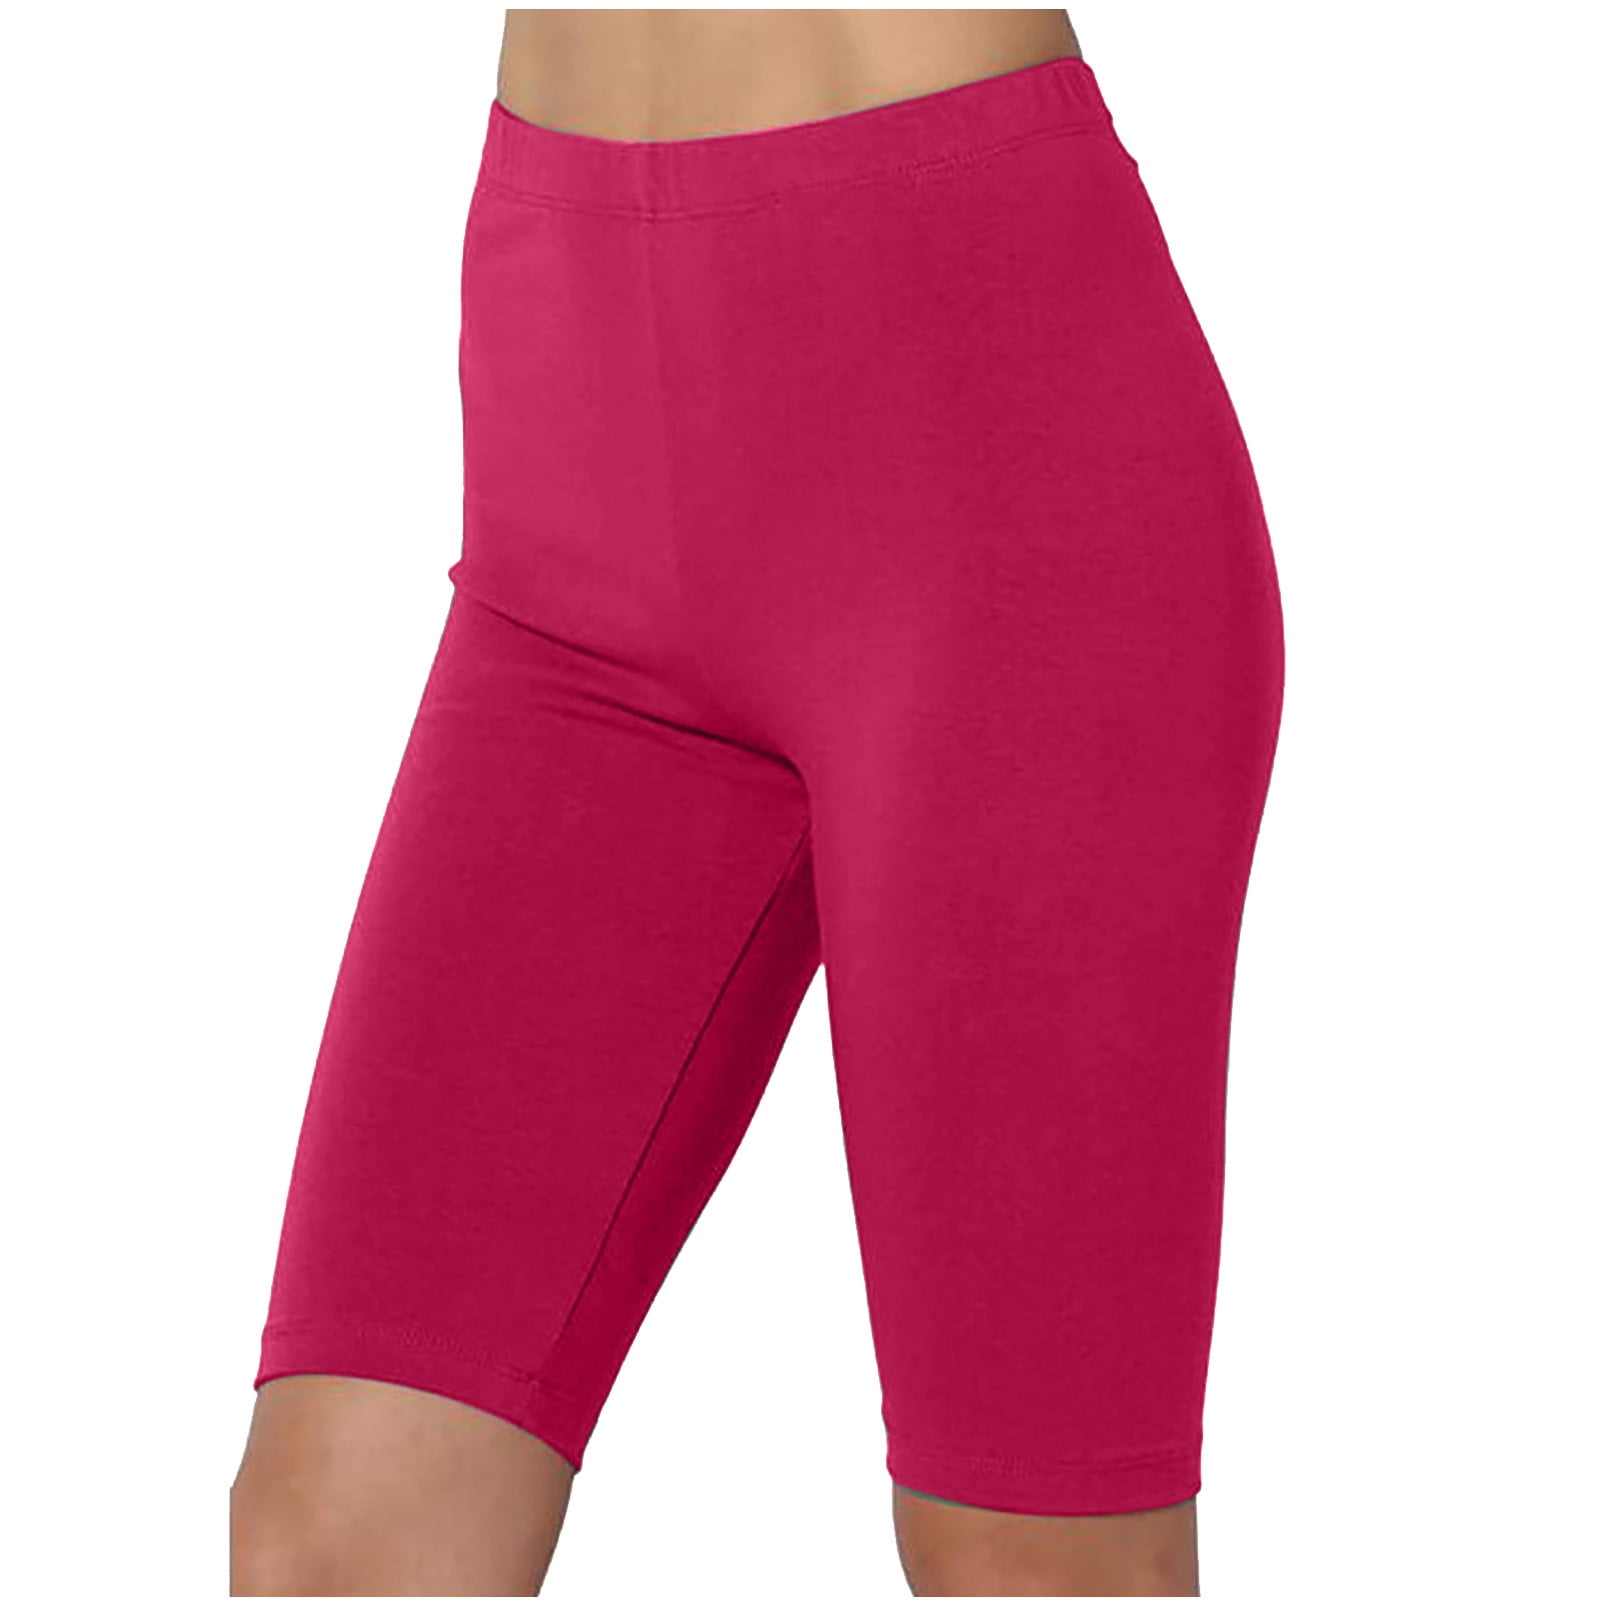 YWDJ Workout Leggings for Women Women Solid Workout Leggings Fitness Sports  Running Yoga Athletic Pants Hot Pink XS 